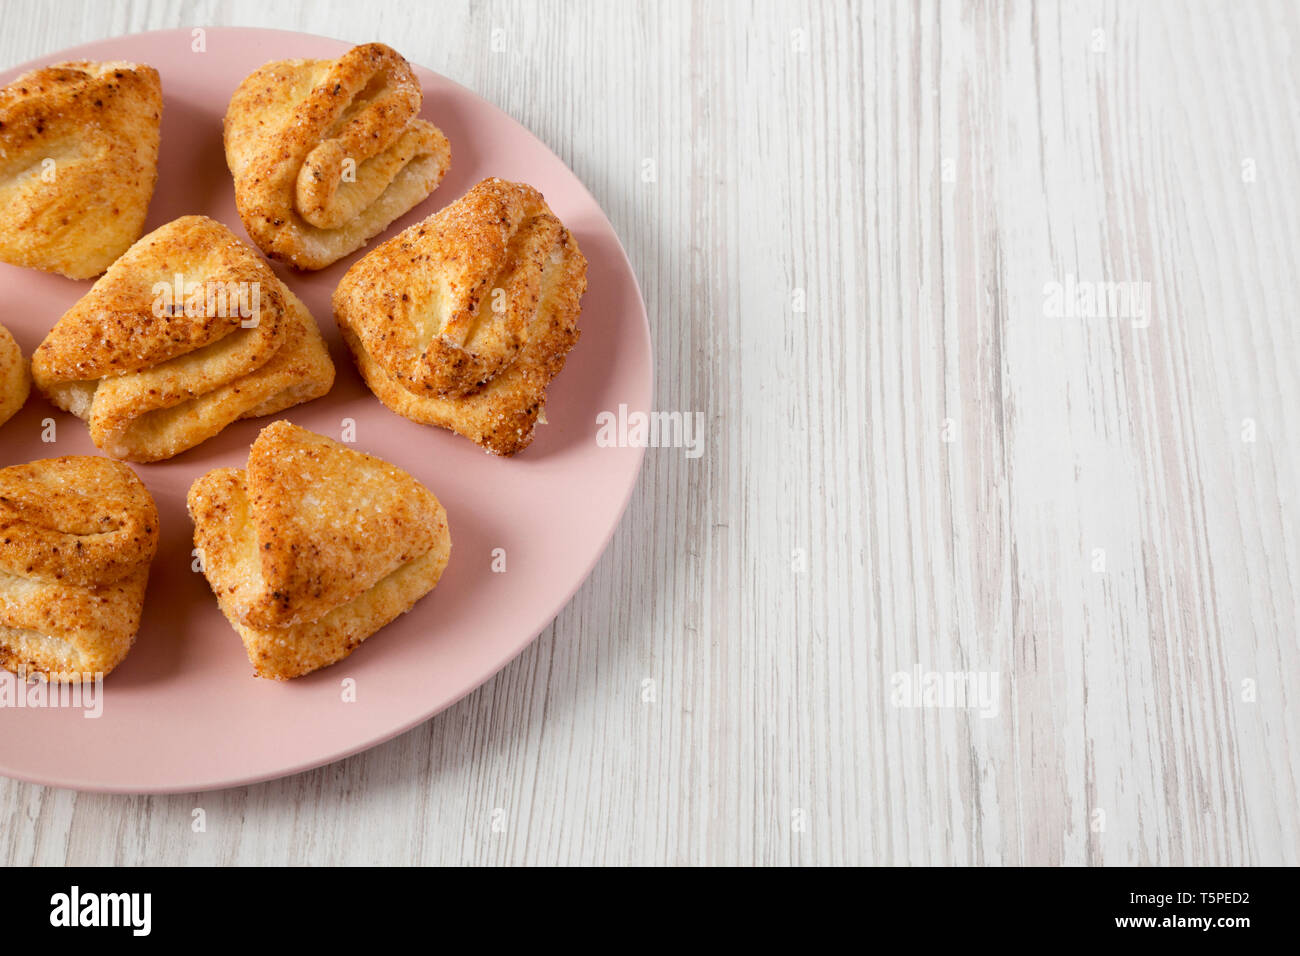 Homemade Cottage Cheese Biscuits On A Pink Plate Over White Wooden